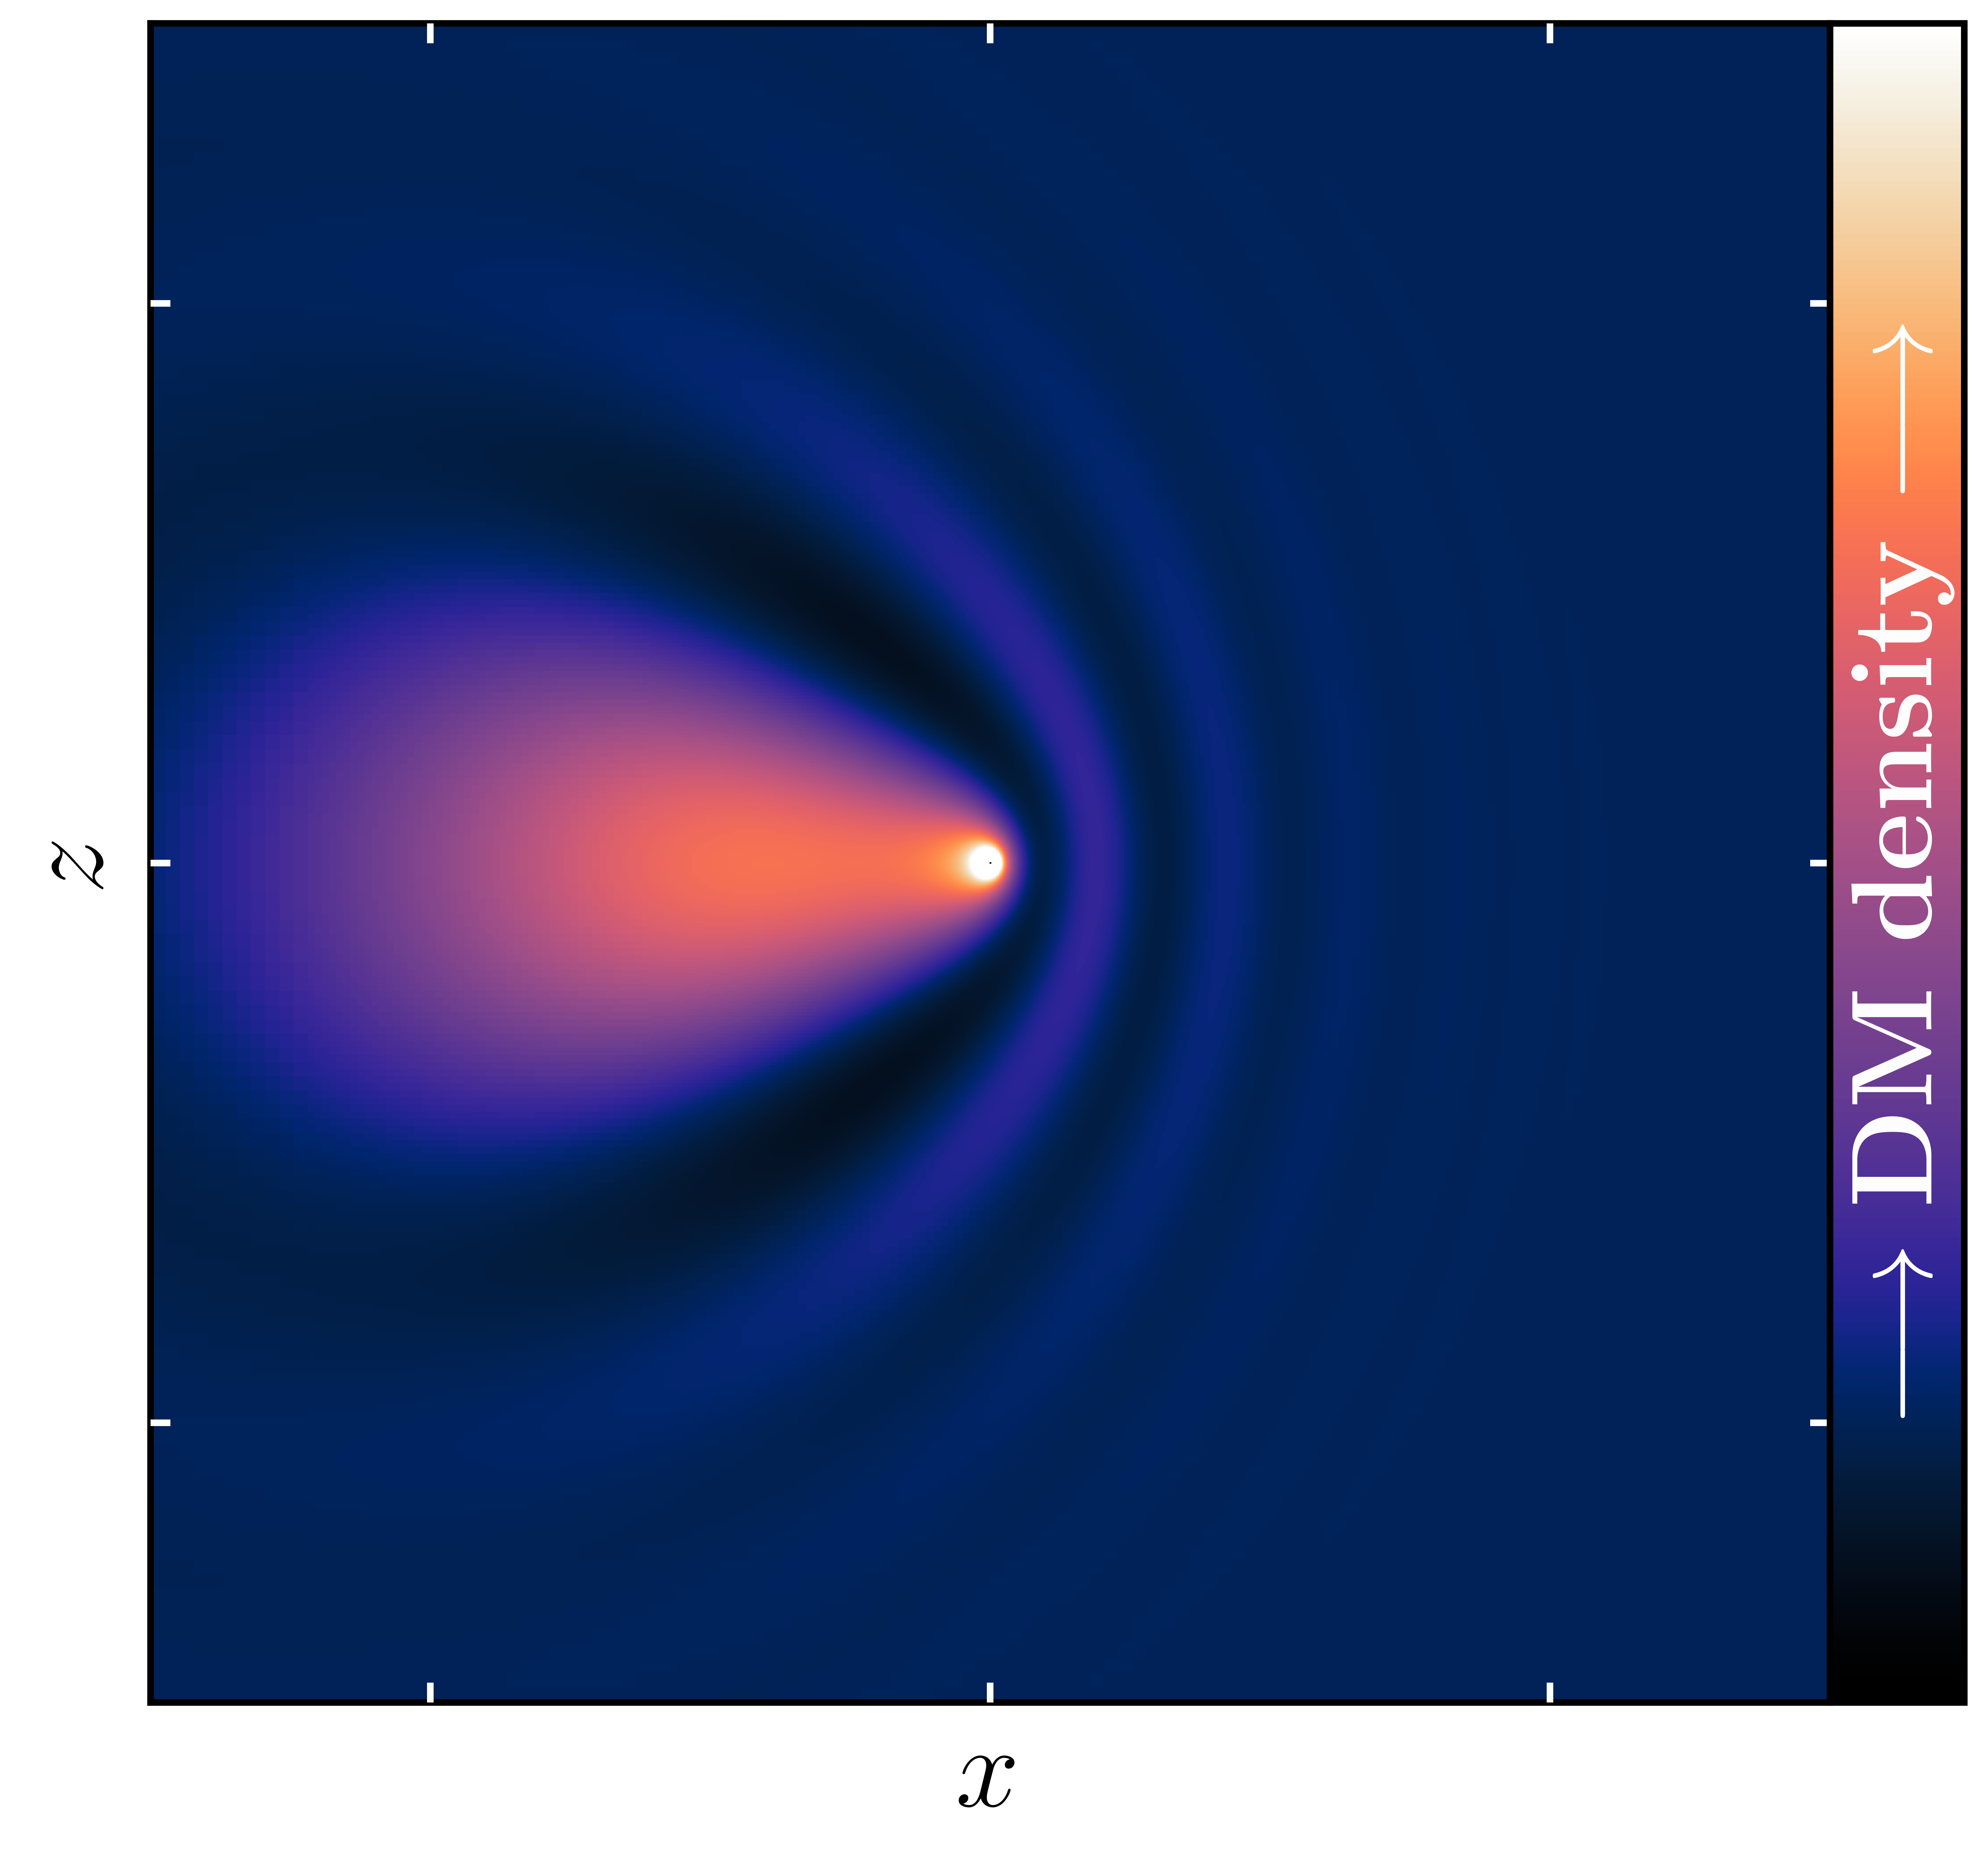 A black hole moving through matter creates an overdense tail that gives a drag force